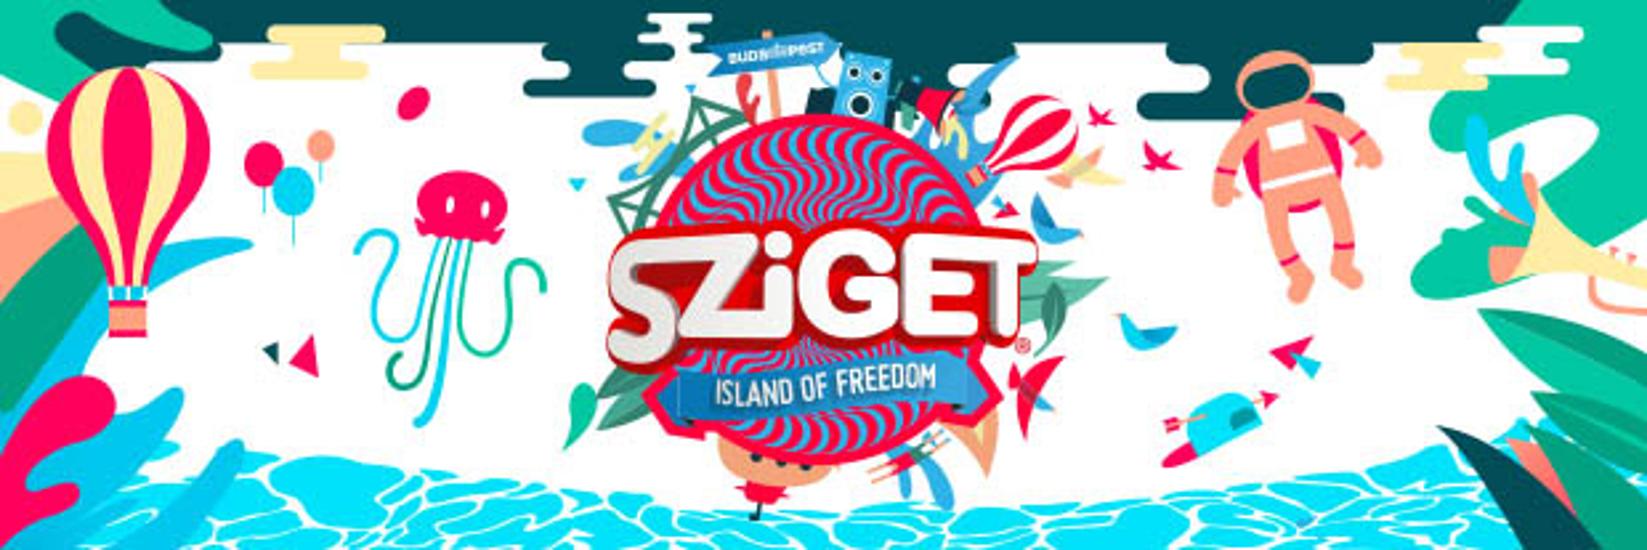 Sziget Festival Prepares For Record Turnout And More